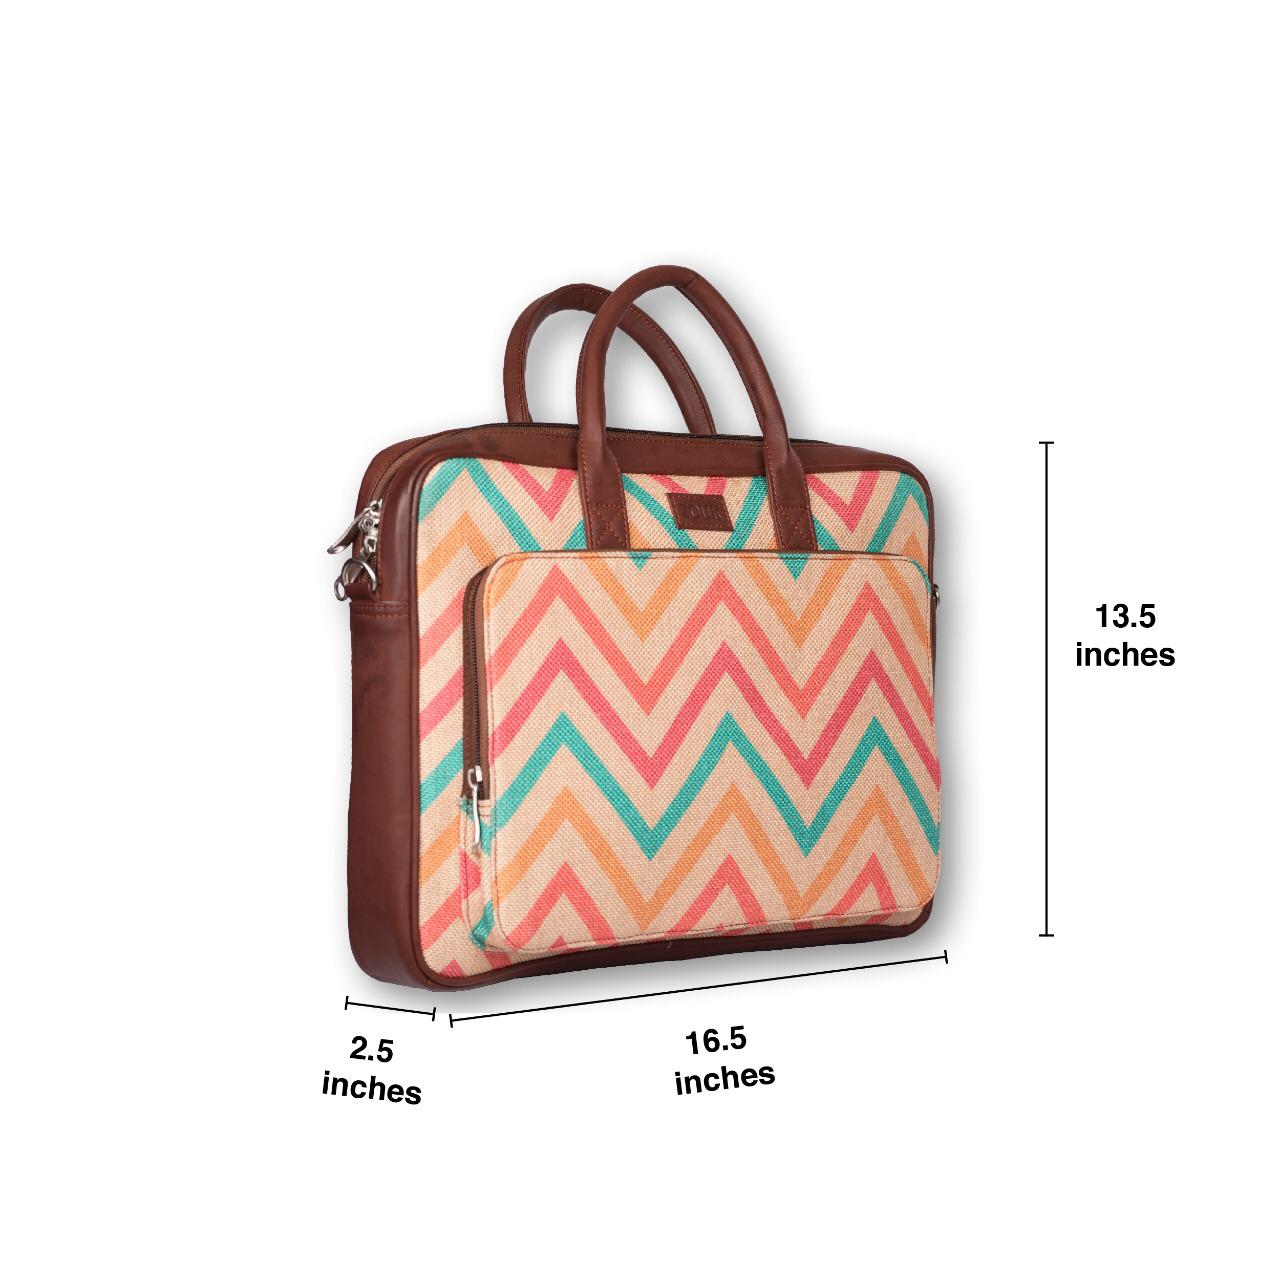 WavBeach Laptop Bag with dimensions